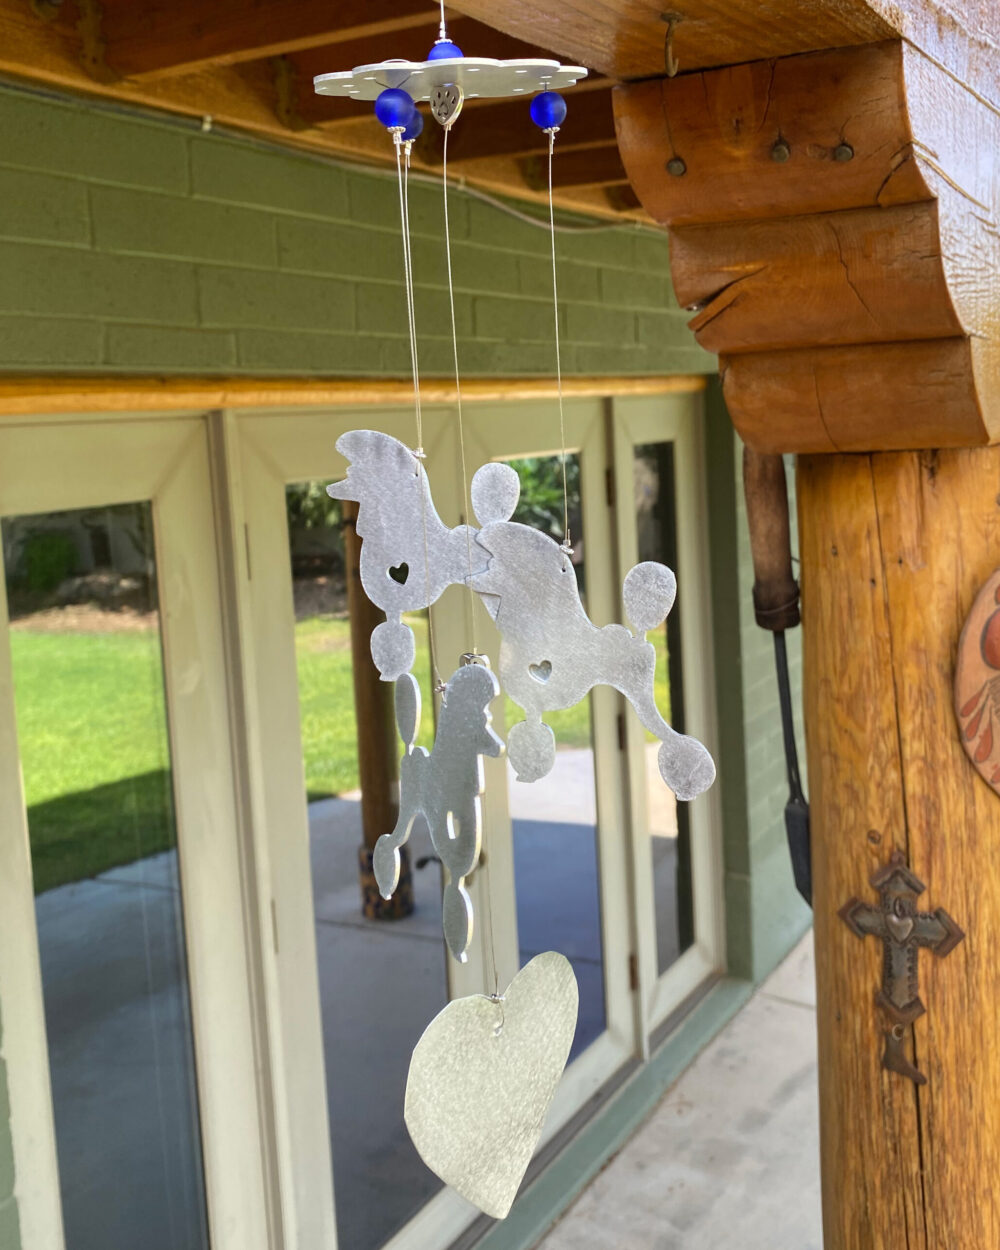 Poodle Wind Chimes are great personalized gifts